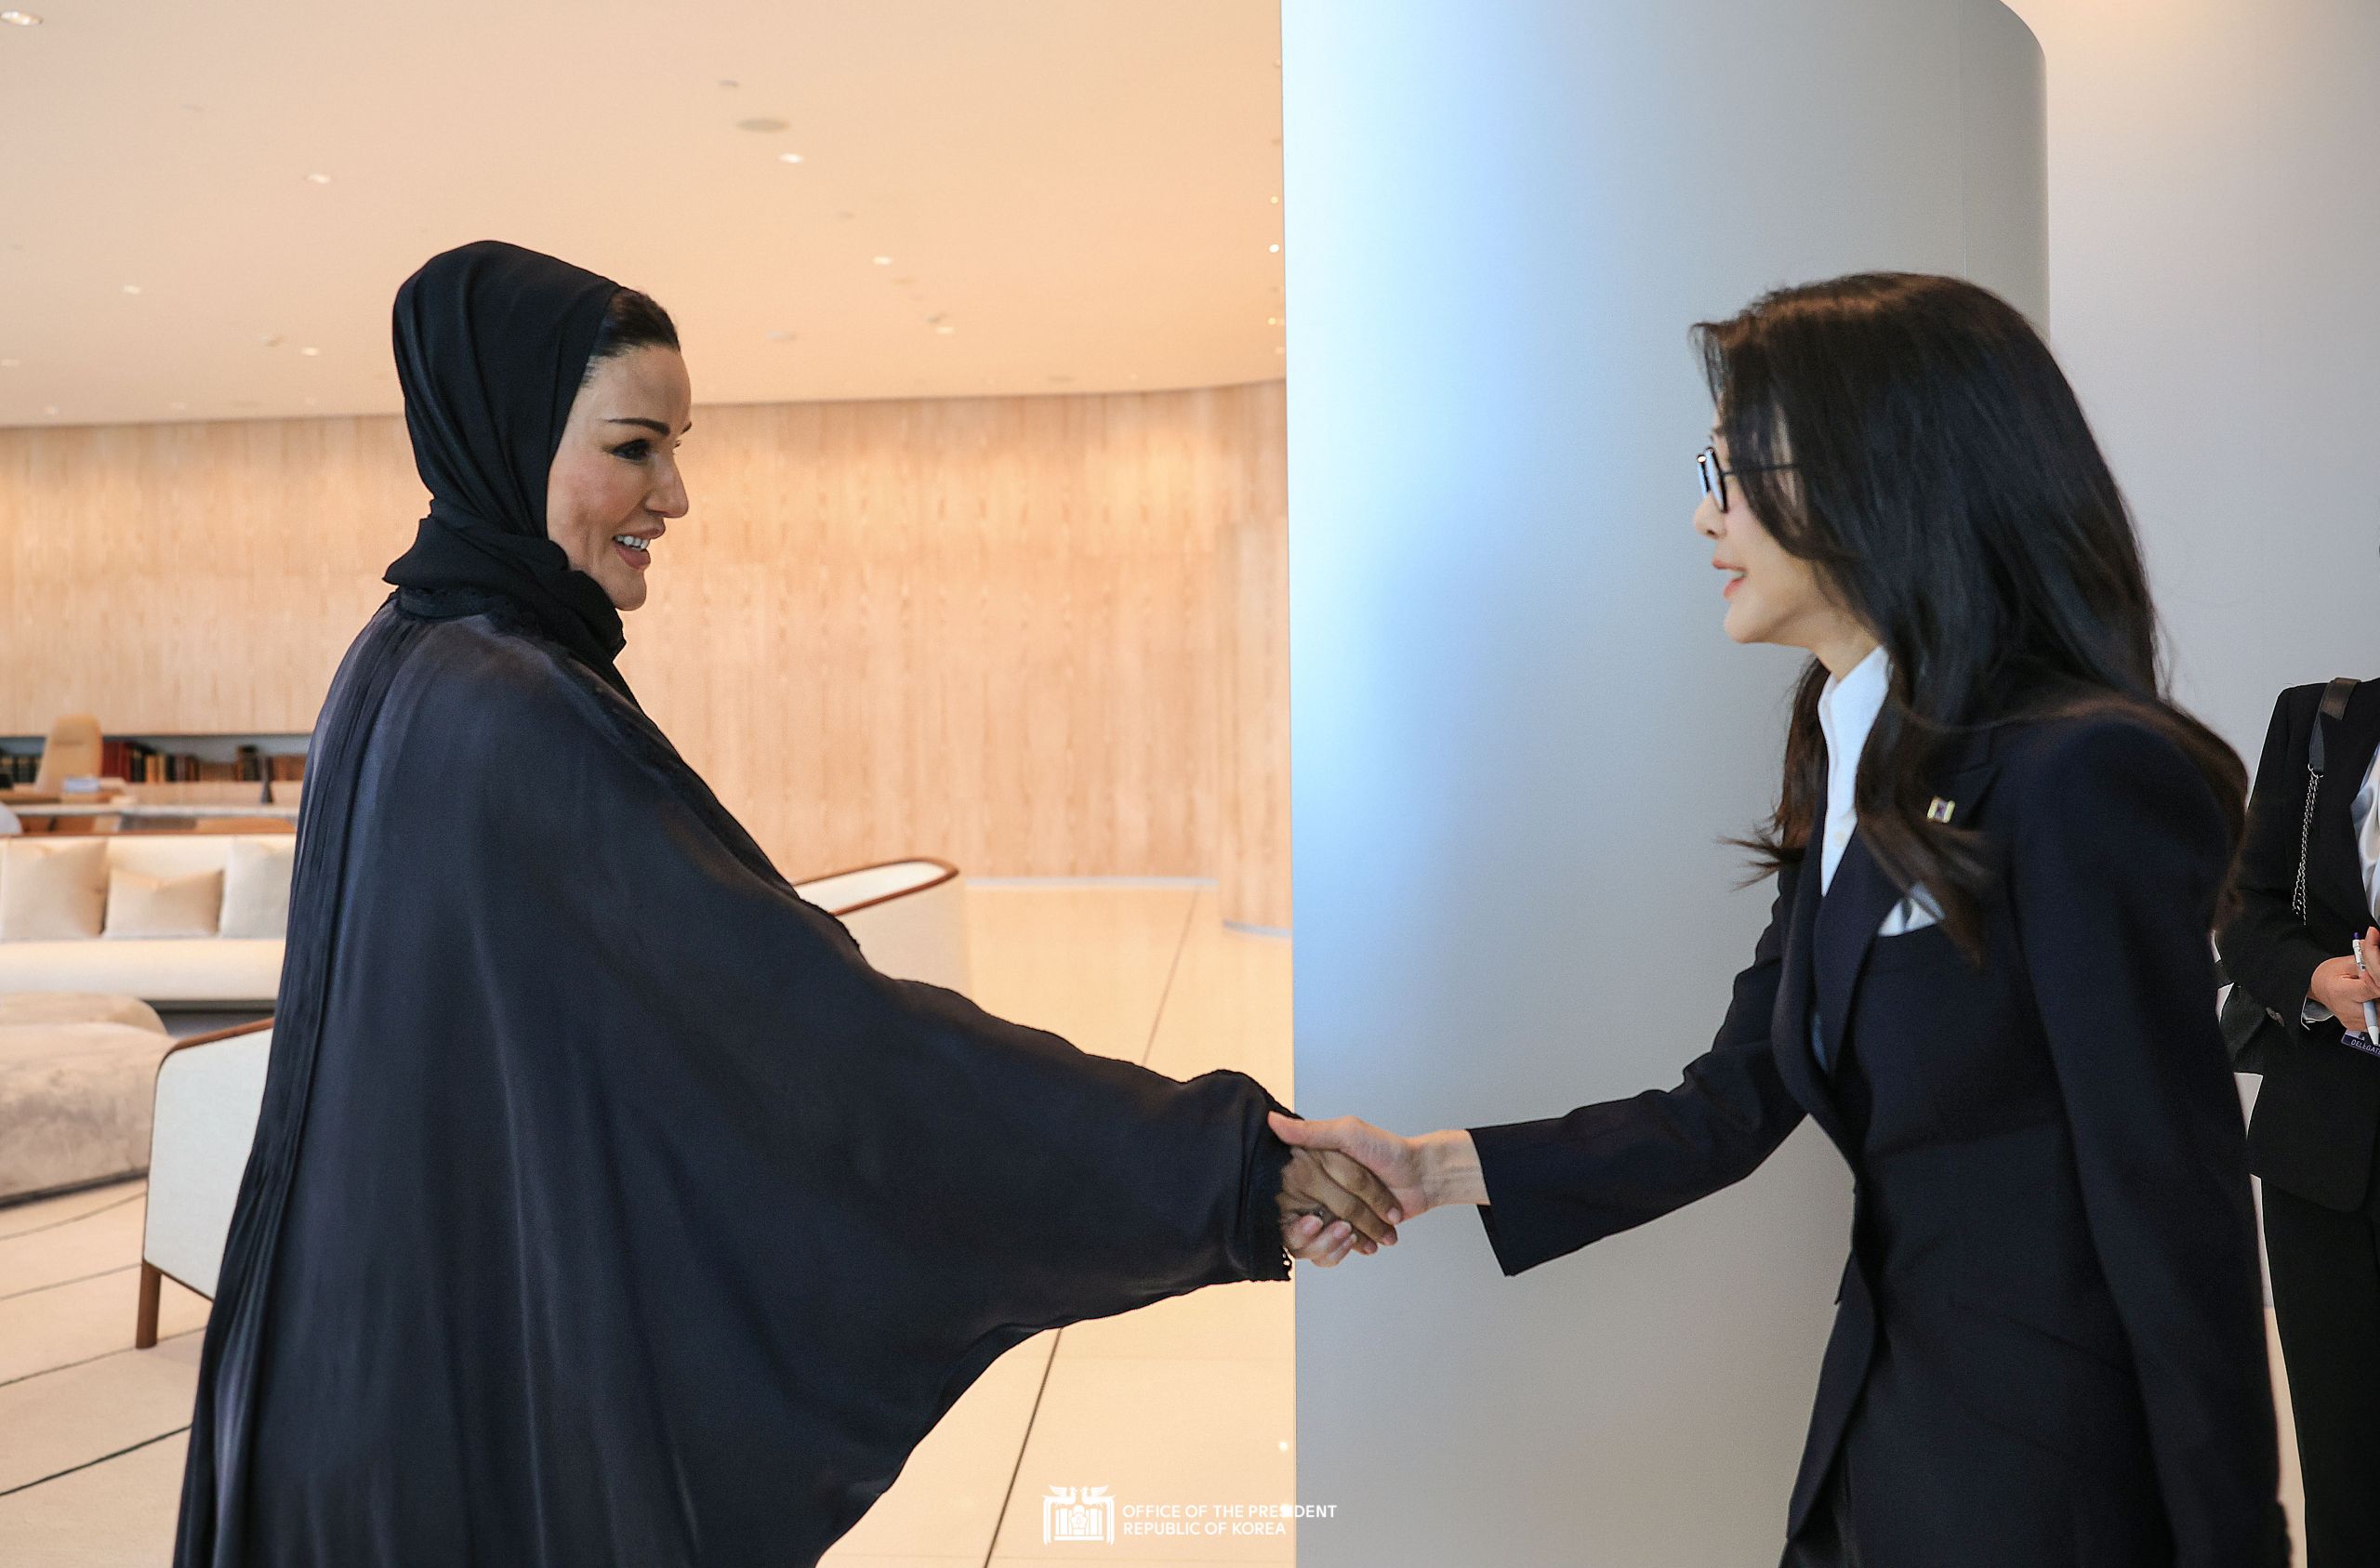 First Lady Kim Keon Hee meeting with Sheikha Moza bint Nasser, the mother of the Emir of Qatar slide 1